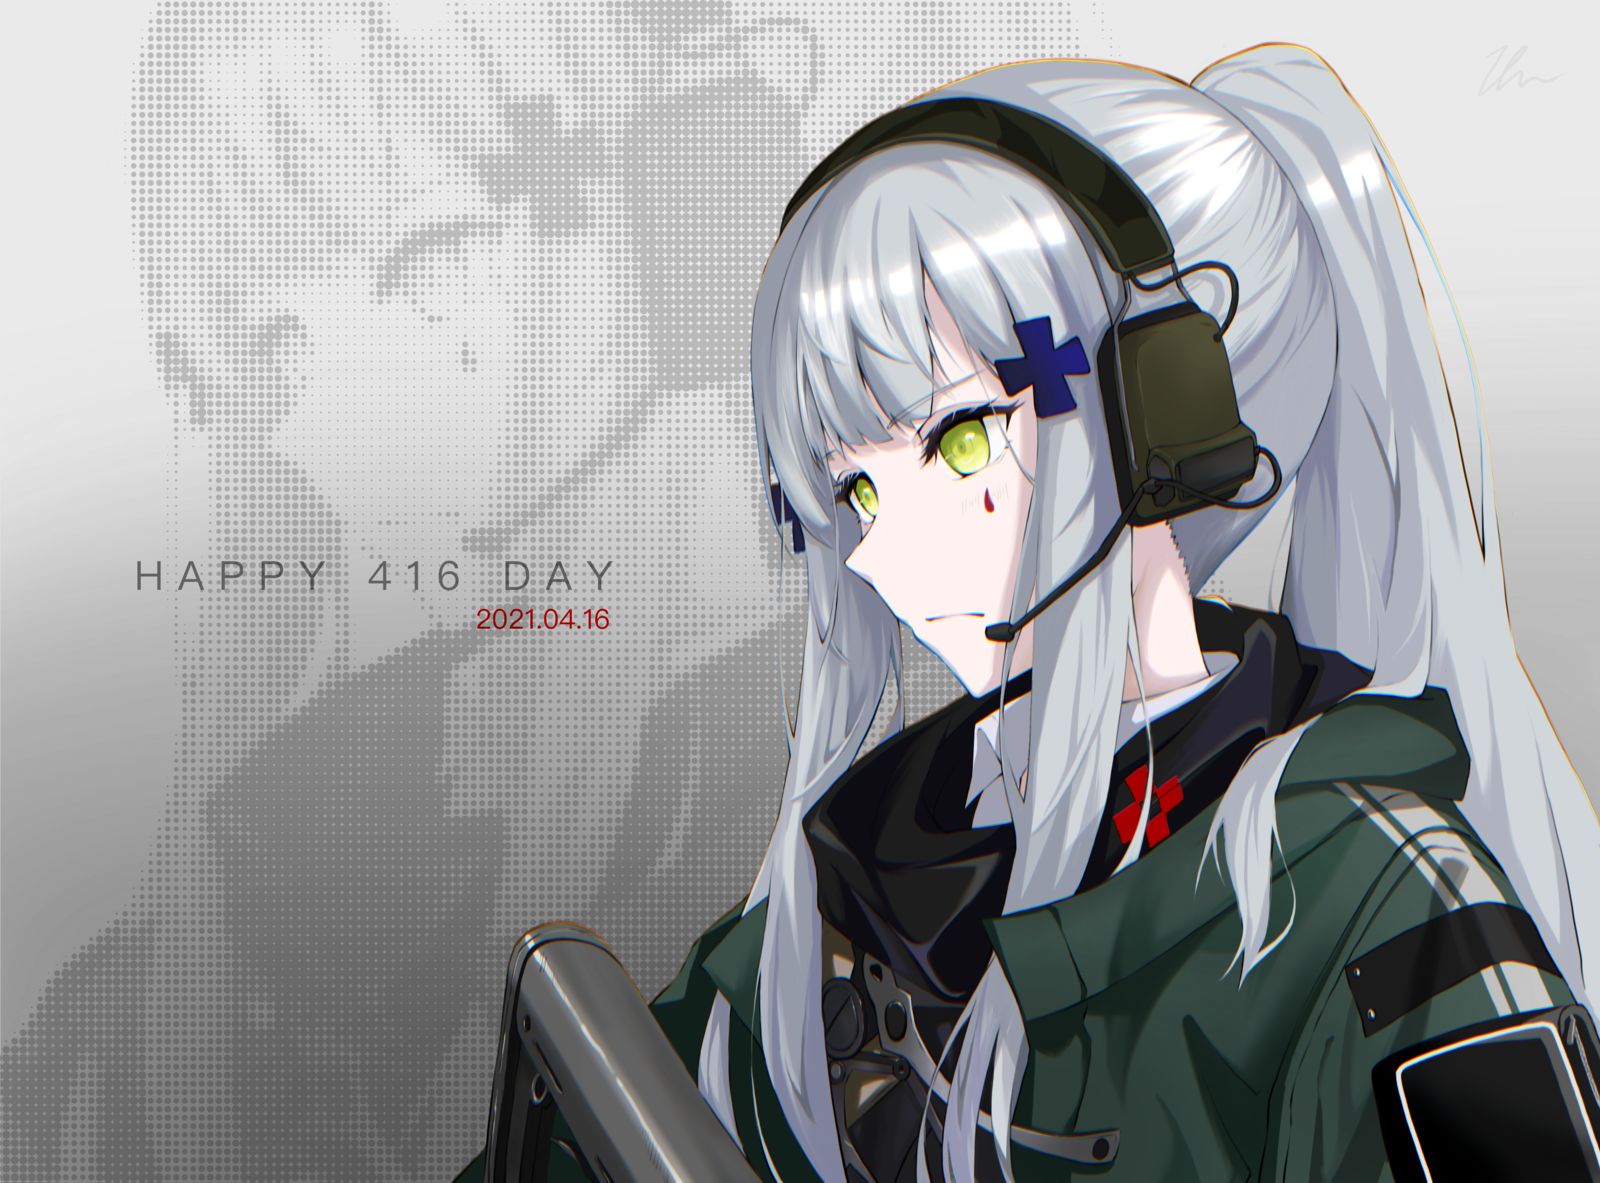 2021 416Day